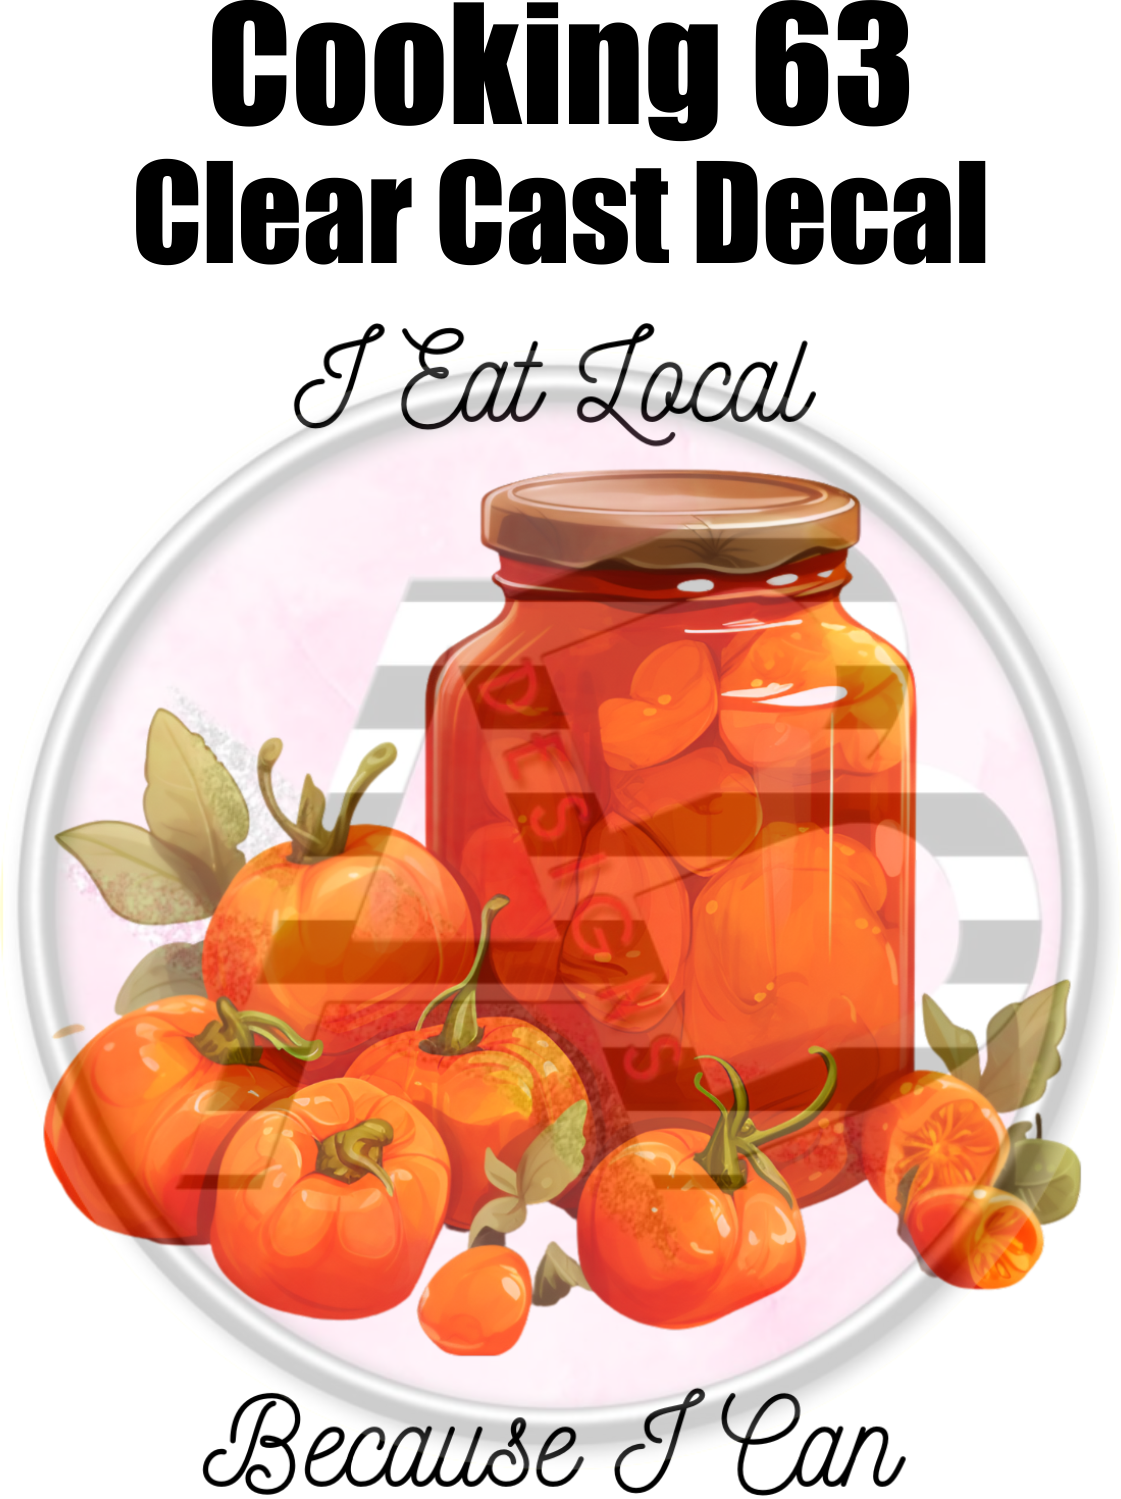 Cooking 63 - Clear Cast Decal - 290